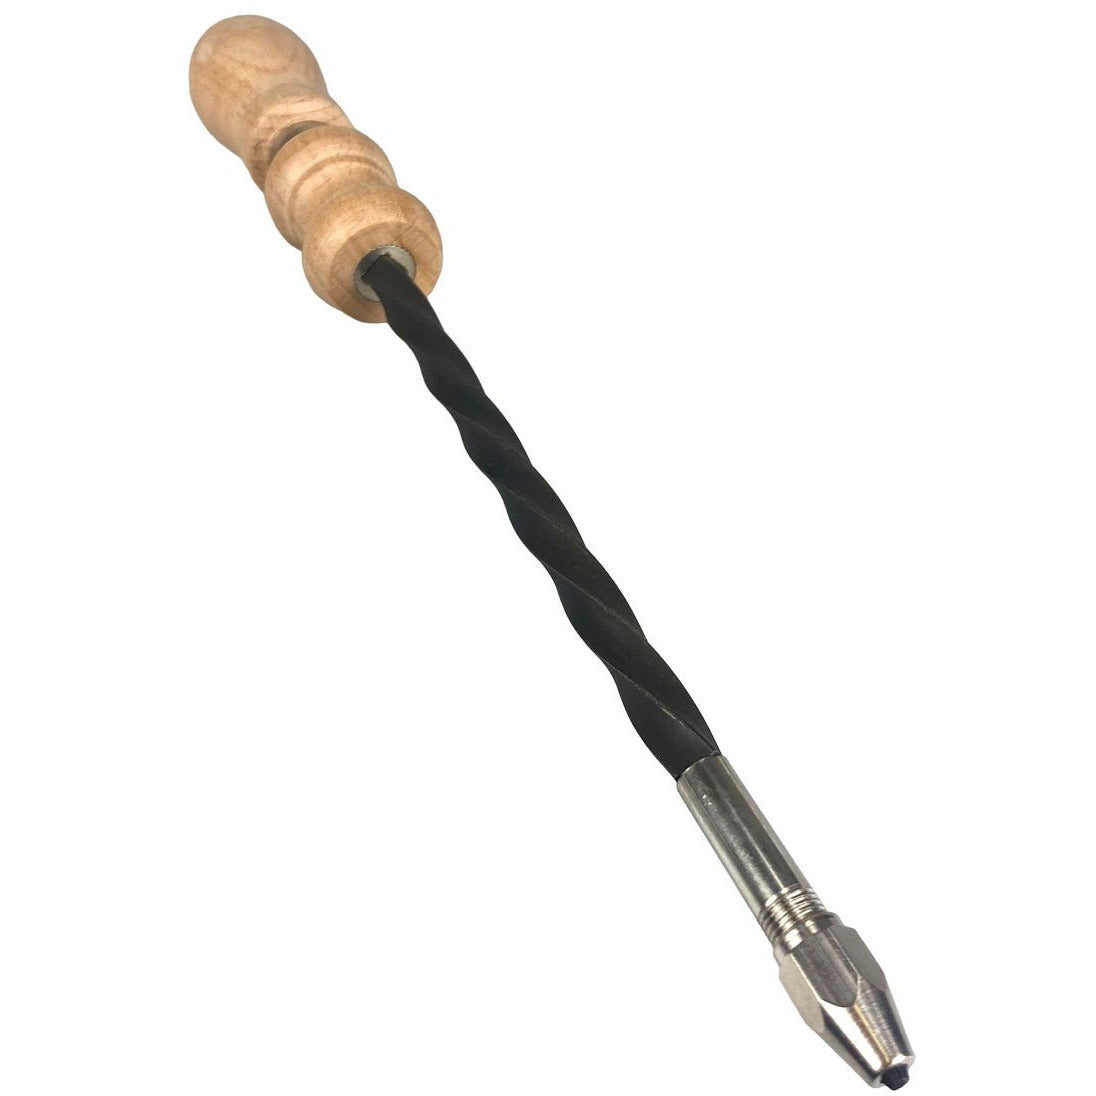 10 -1/2 Inch Wooden Handled Push Drill With Extra Collet - TJ01-01260 - ToolUSA